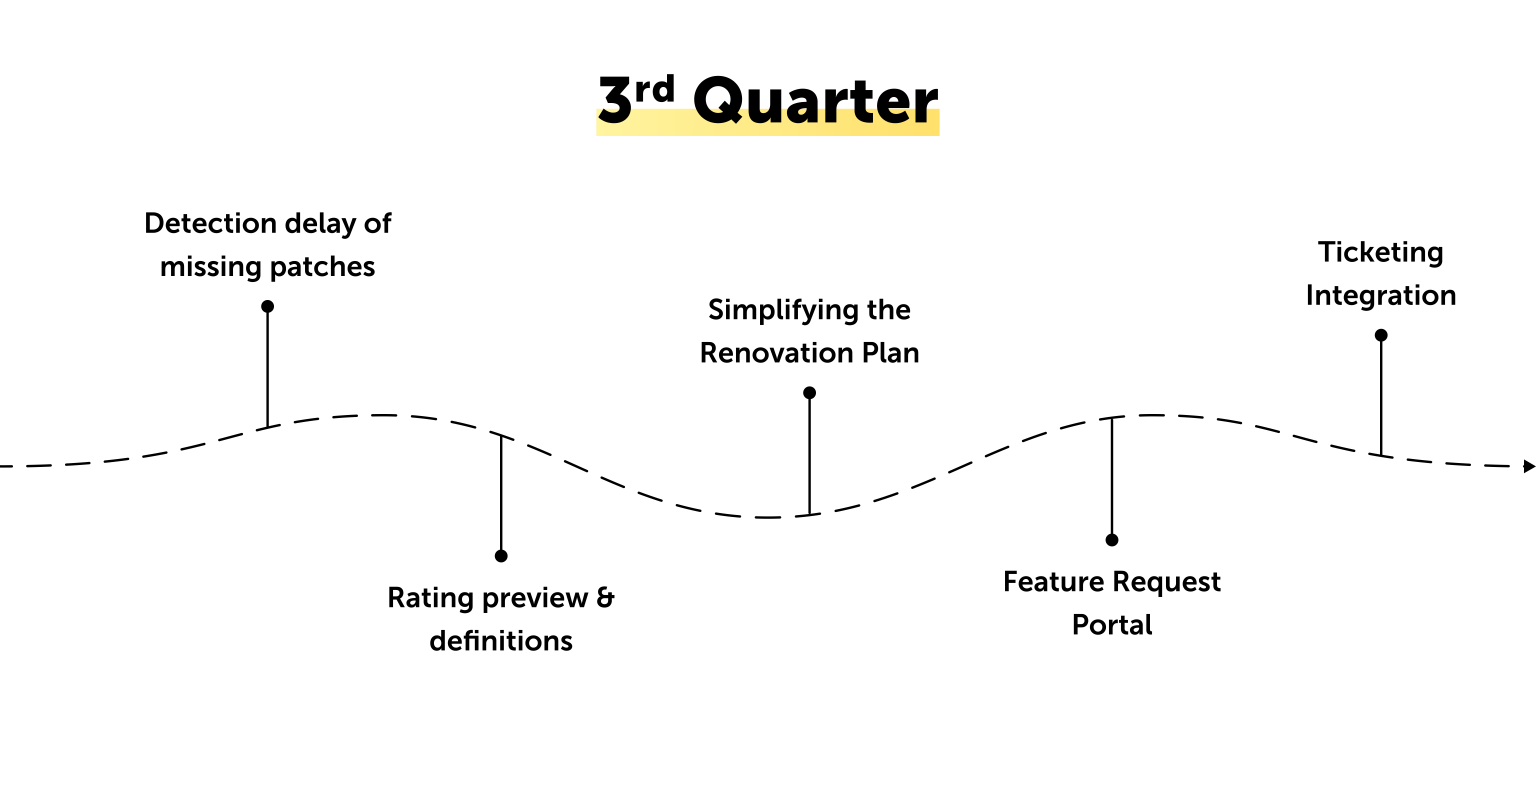 features of the 3rd quarter